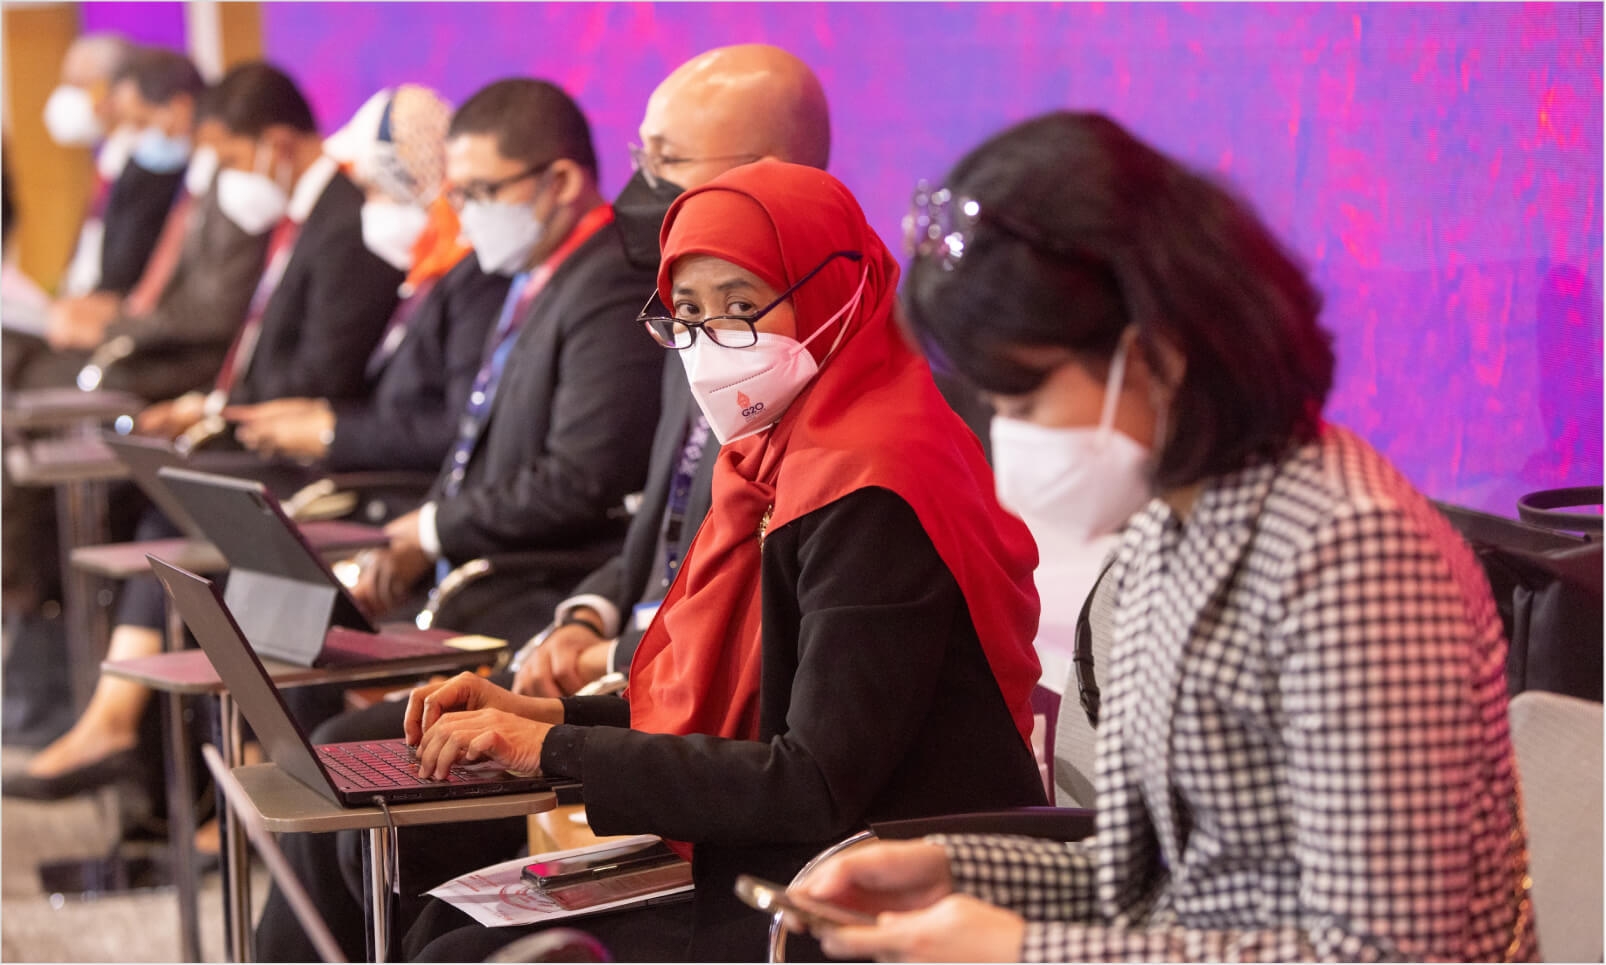 A woman in an orange-red hijab at a conference